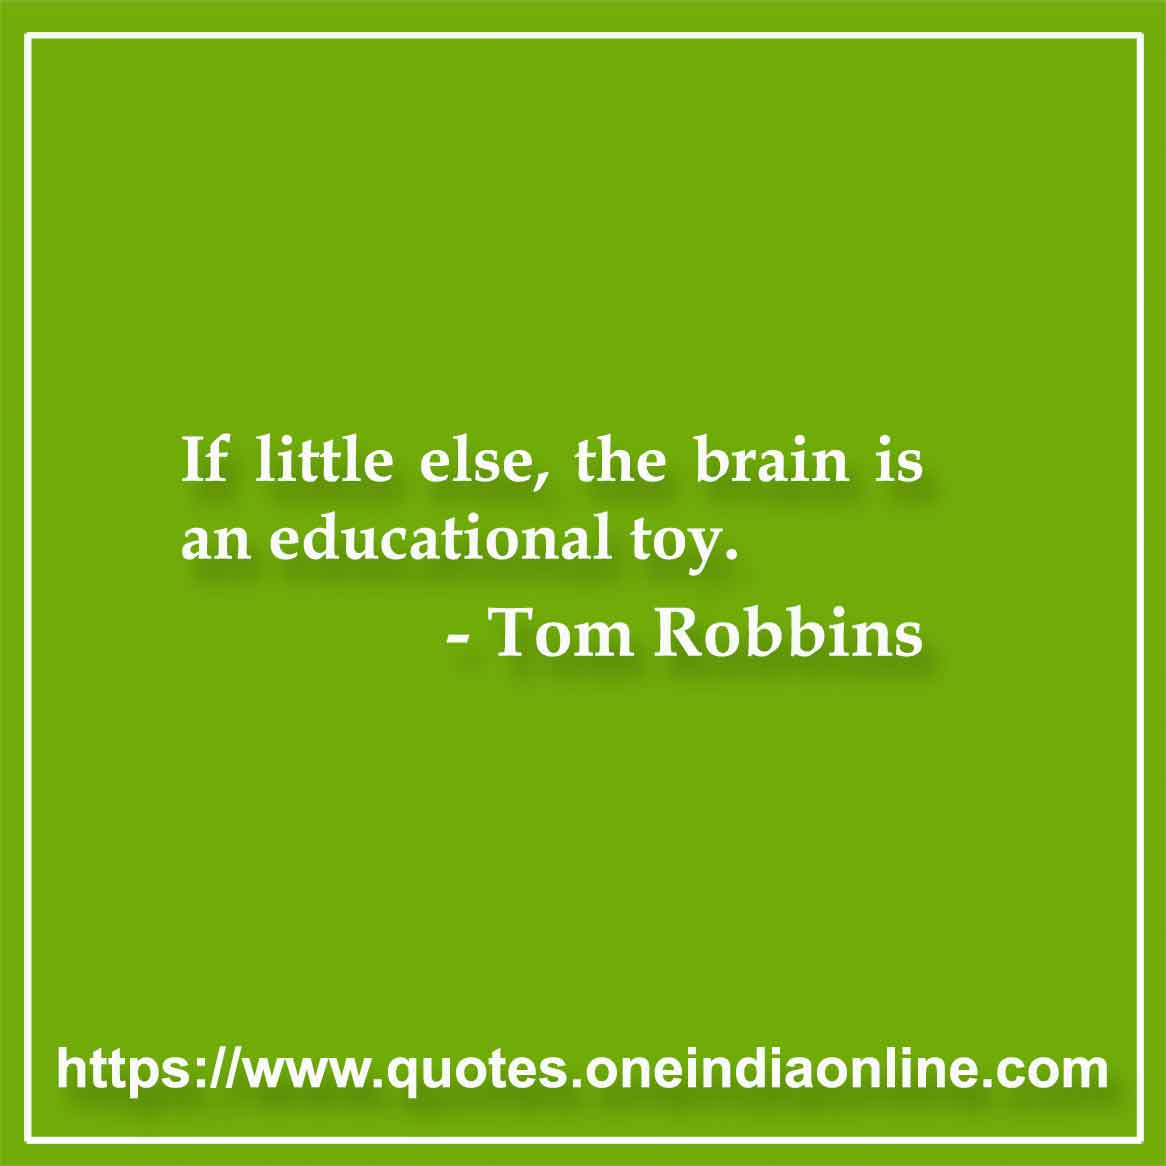 If little else, the brain is an educational toy.

- Brain Quote by Tom Robbins